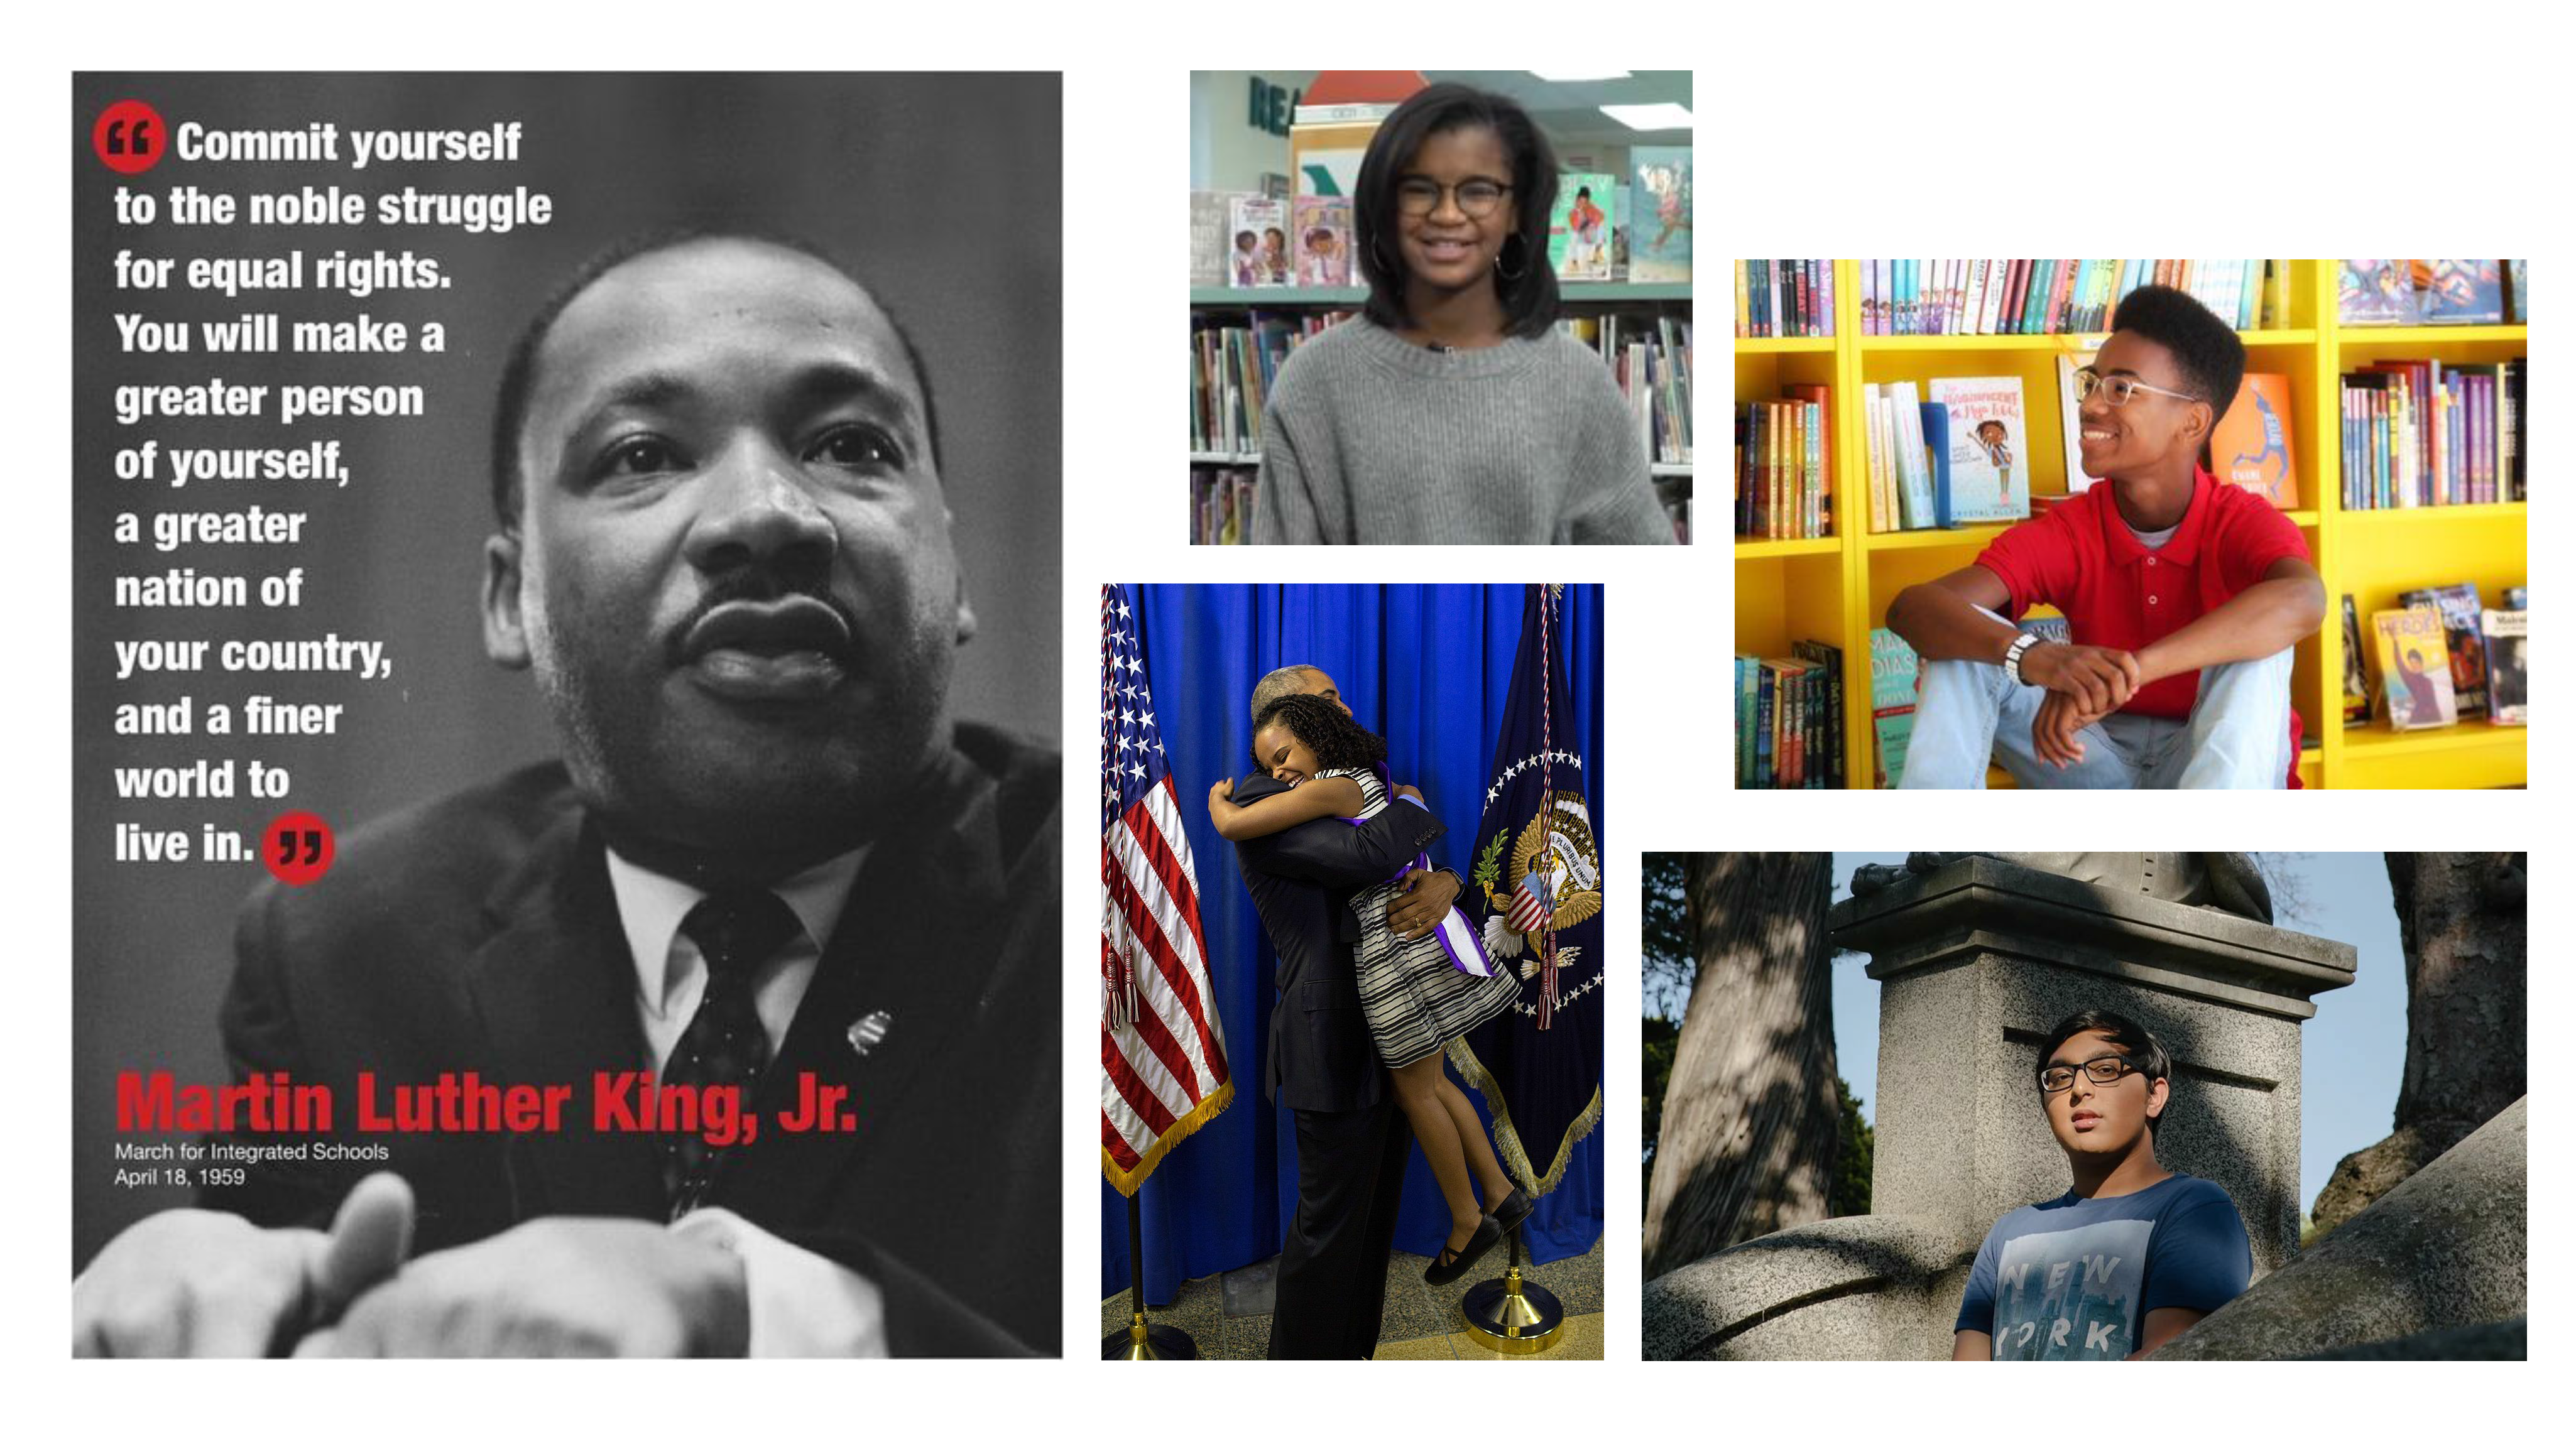 Quotation by Dr. King and images of each person highlighted in the post